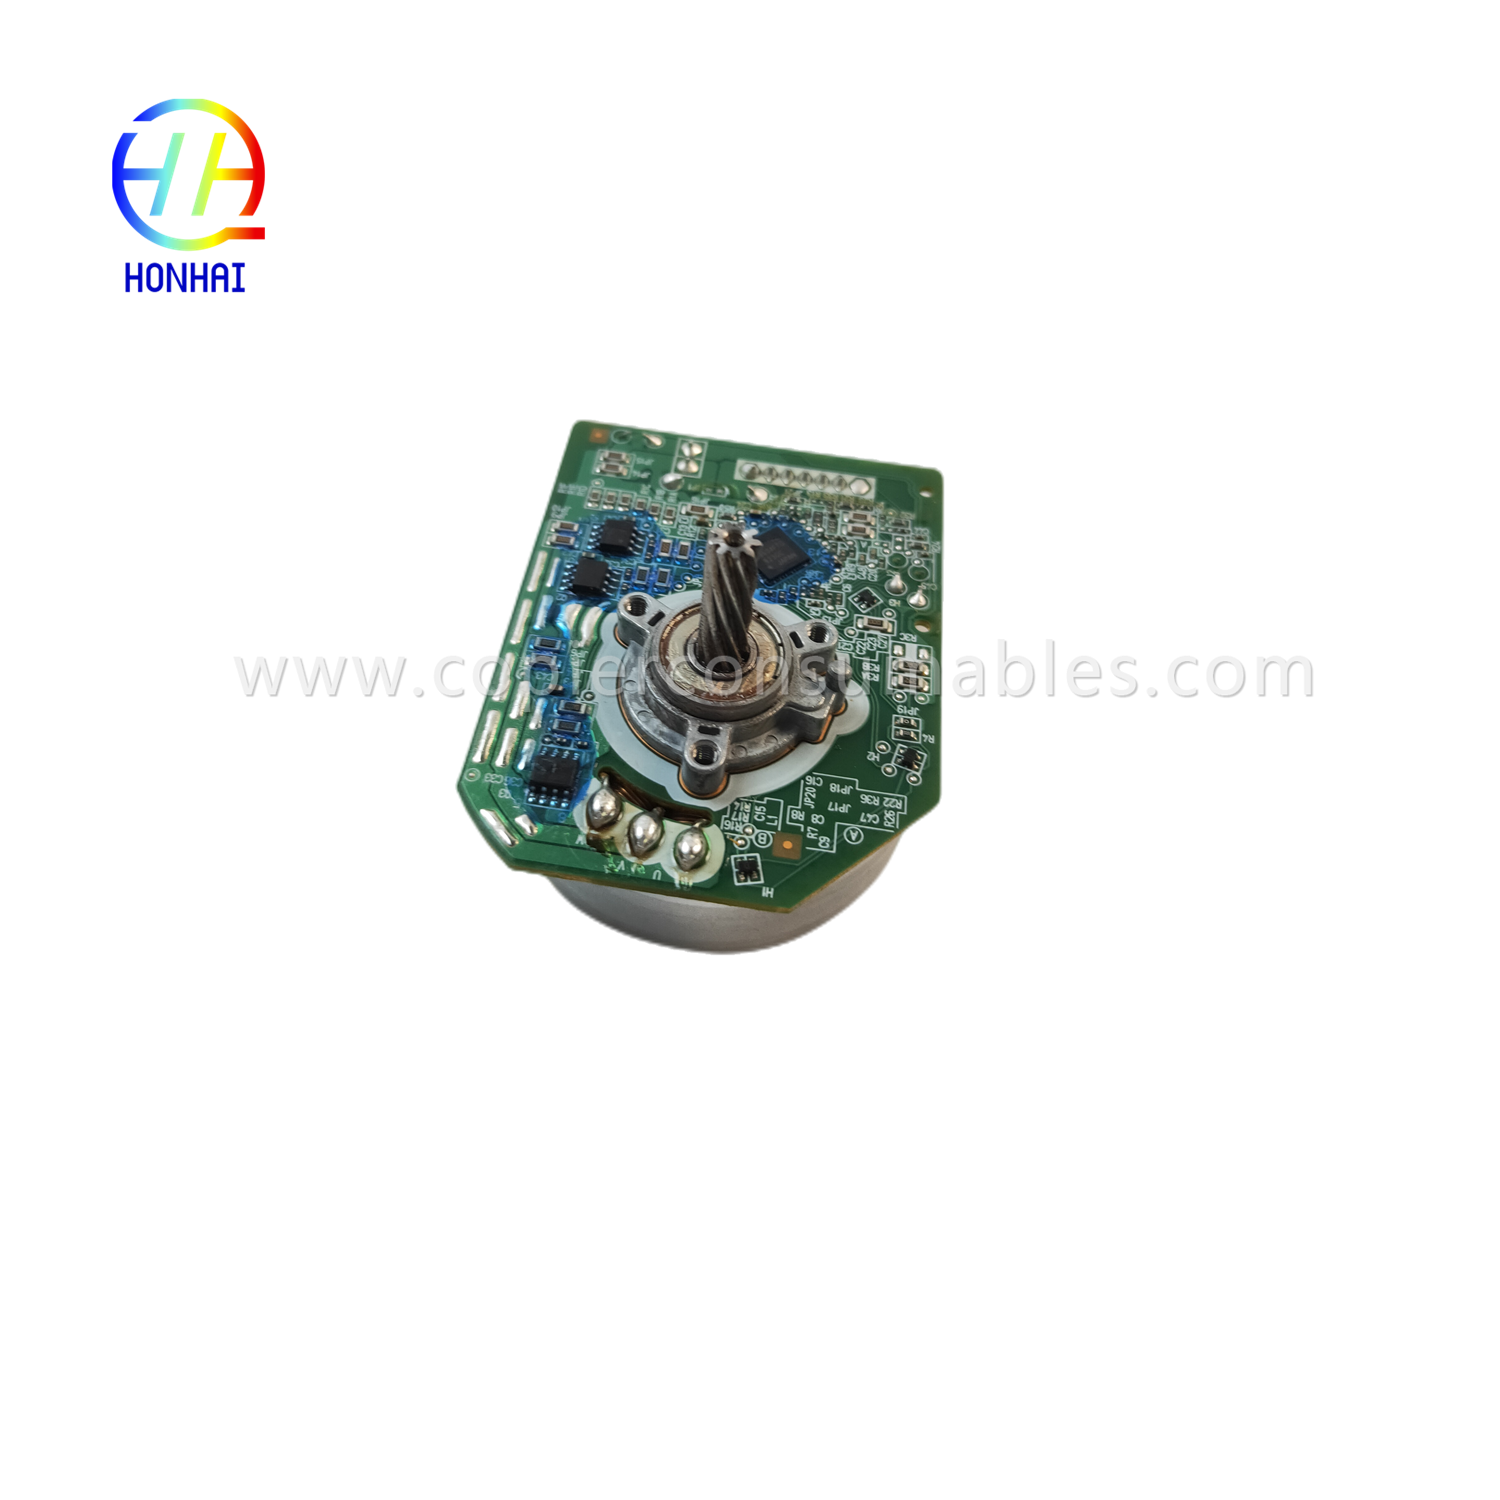 https://c585.goodao.net/motor-for-kyocera-ecosys-serie-parts-nr-302lc44014-48m069f052-b-product/